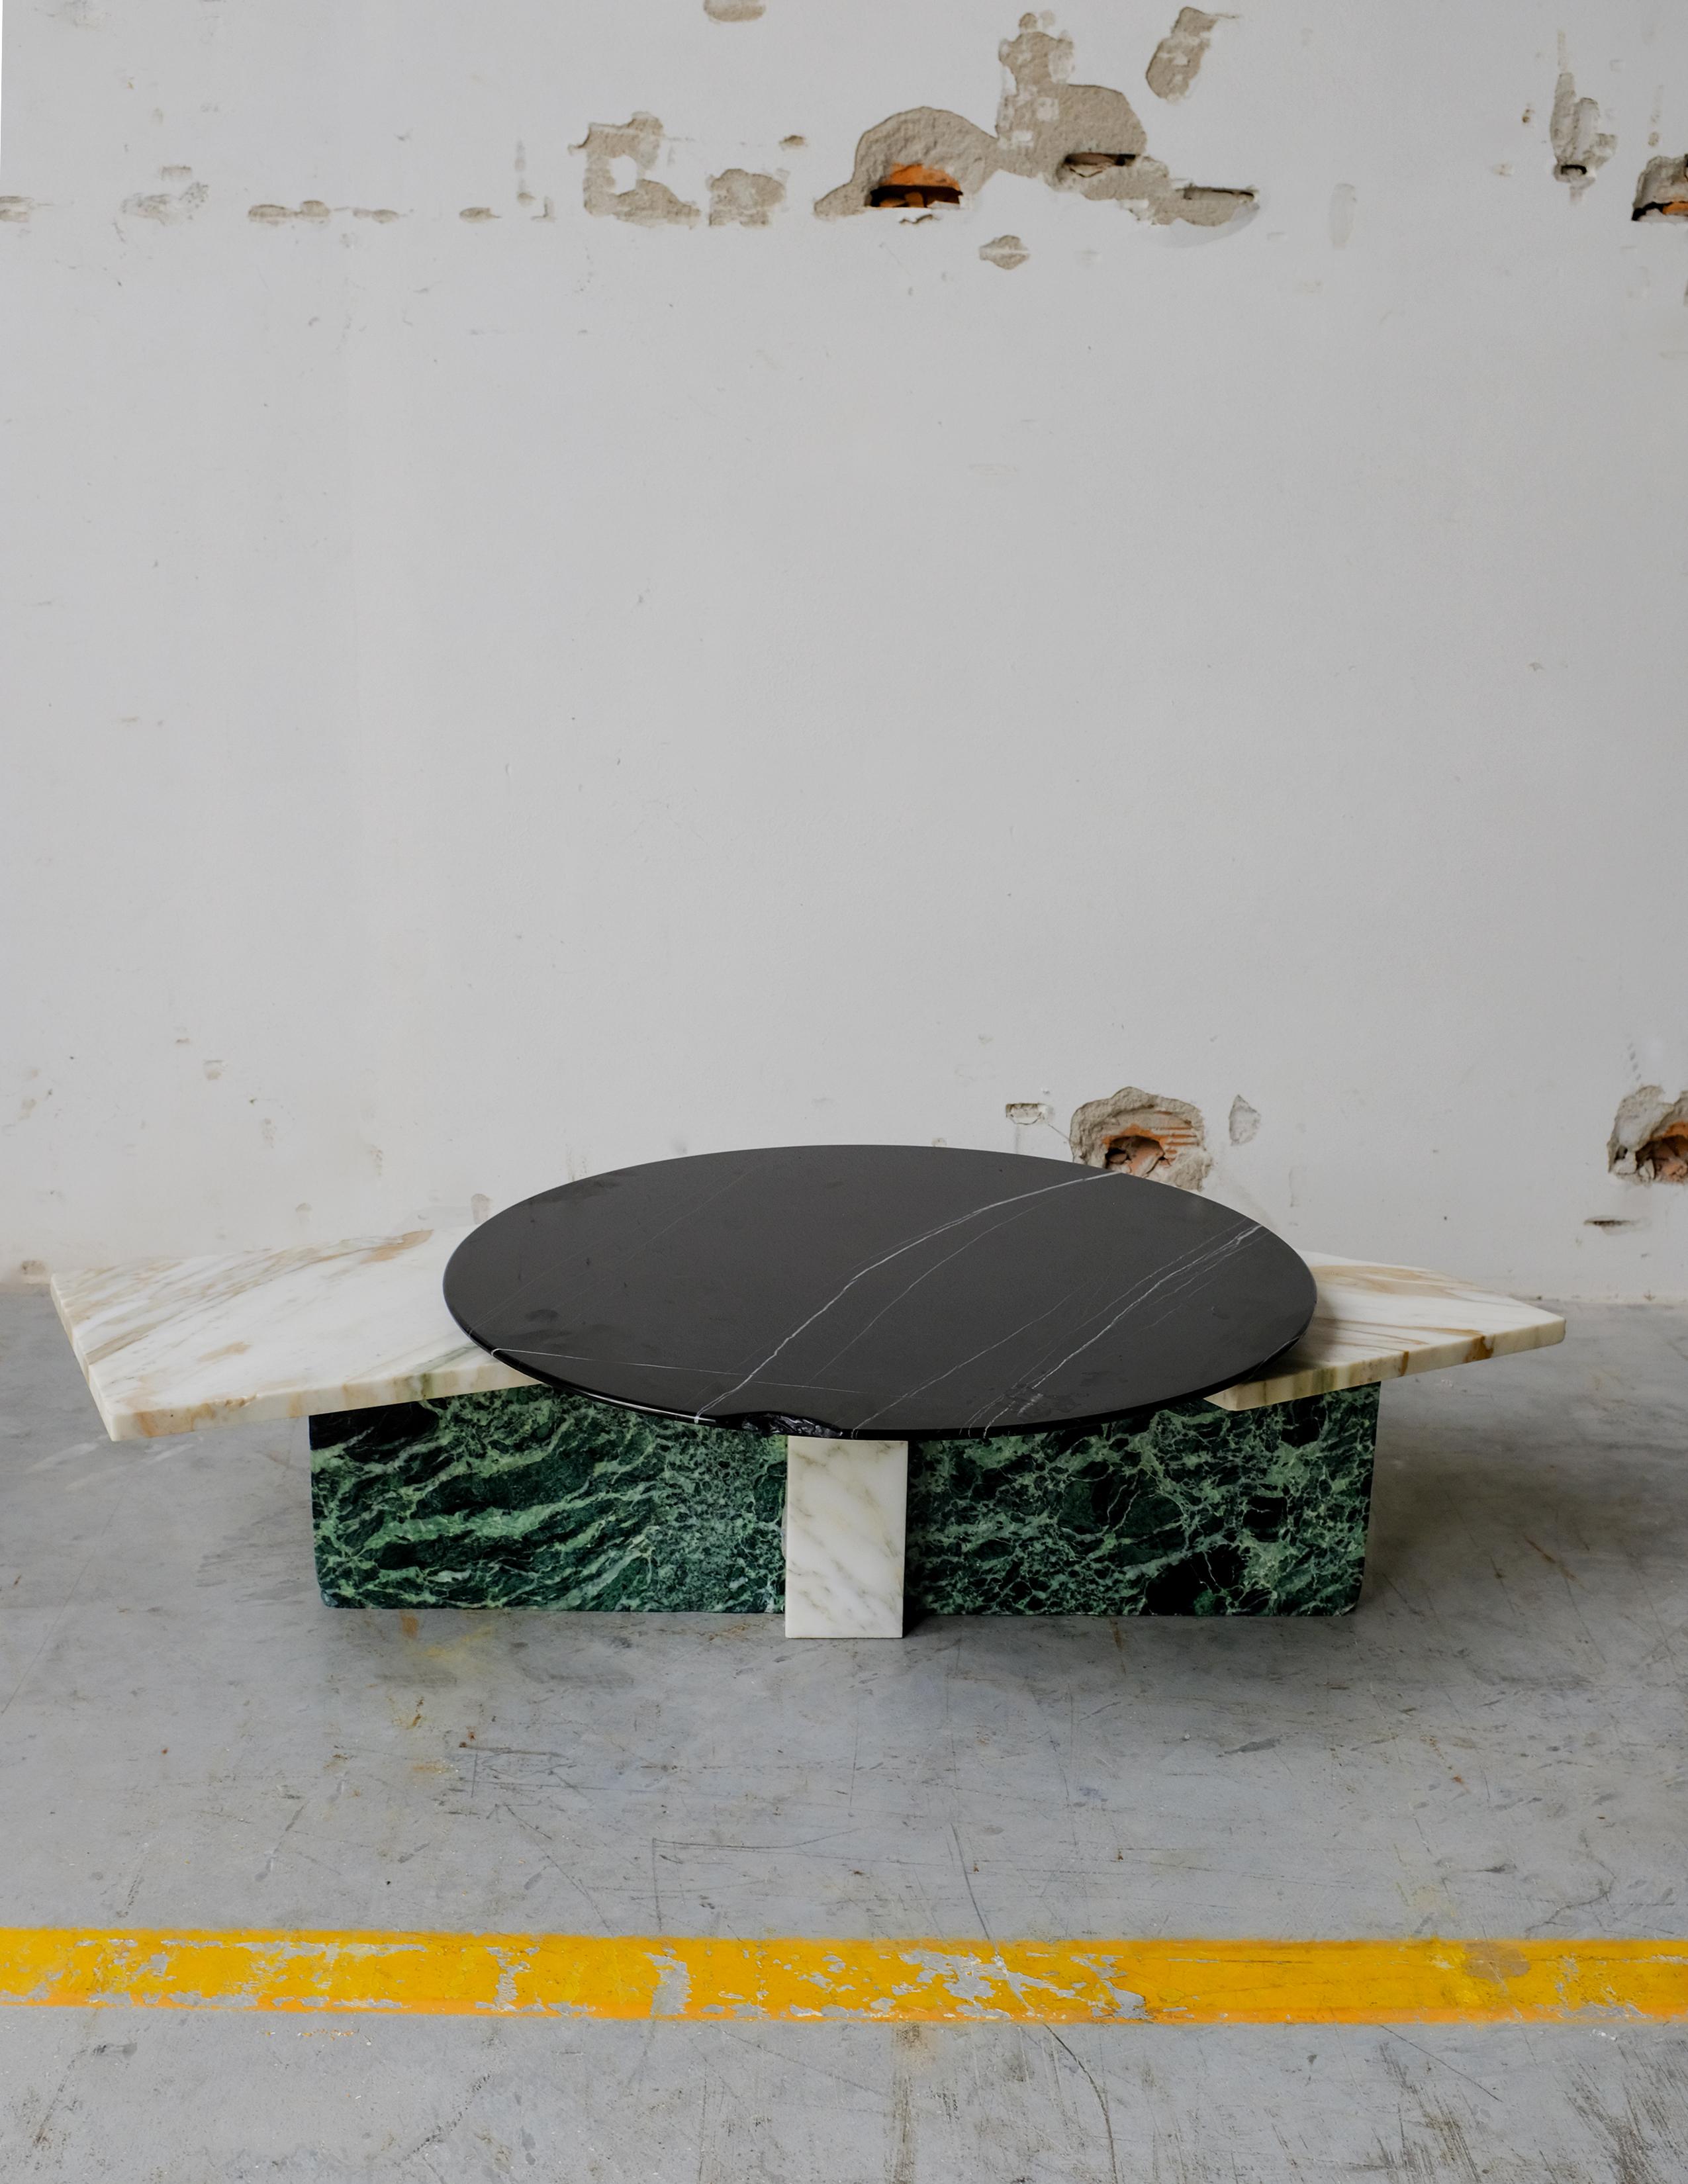 SST003 low table by Stone Stackers
Dimensions: D100x H26 cm
Materials: Marbles:
Marble structure: Verde Alpi
Marble top: Sahara Noir
Marble top lateral: Palissandro
Weight: 49 kg

This particular low table is marked by a subtle beauty